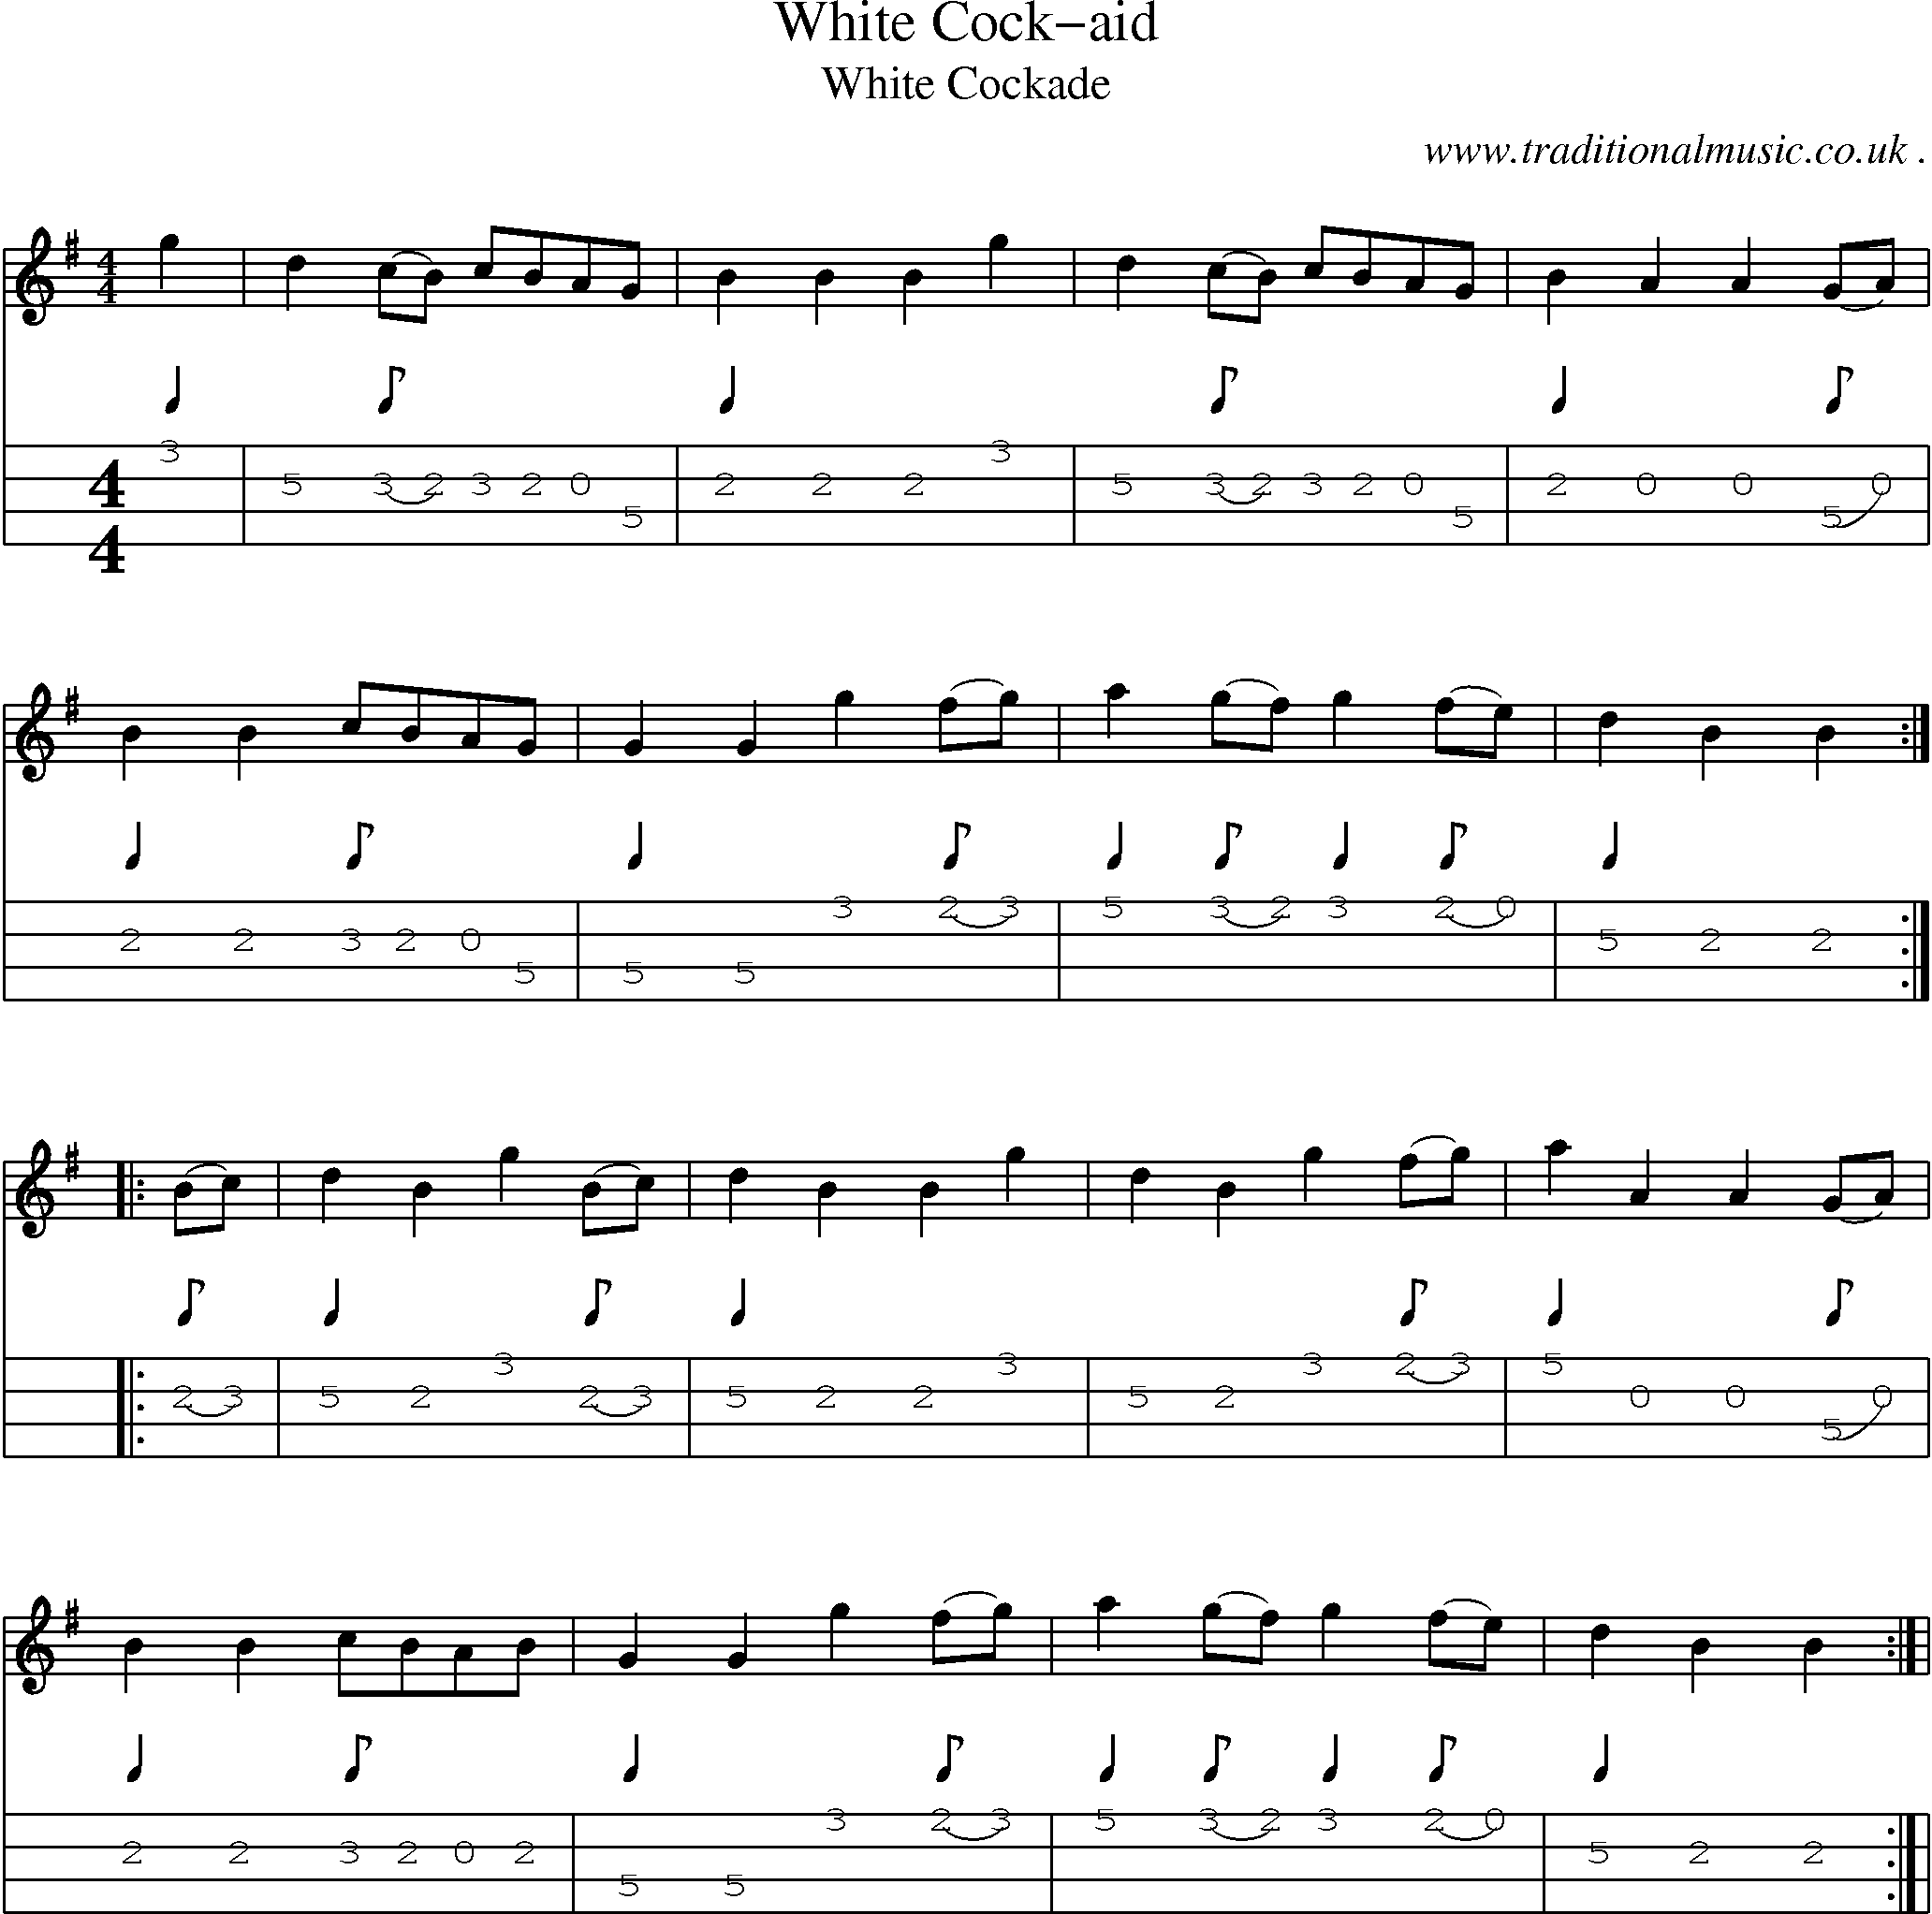 Sheet-Music and Mandolin Tabs for White Cock-aid